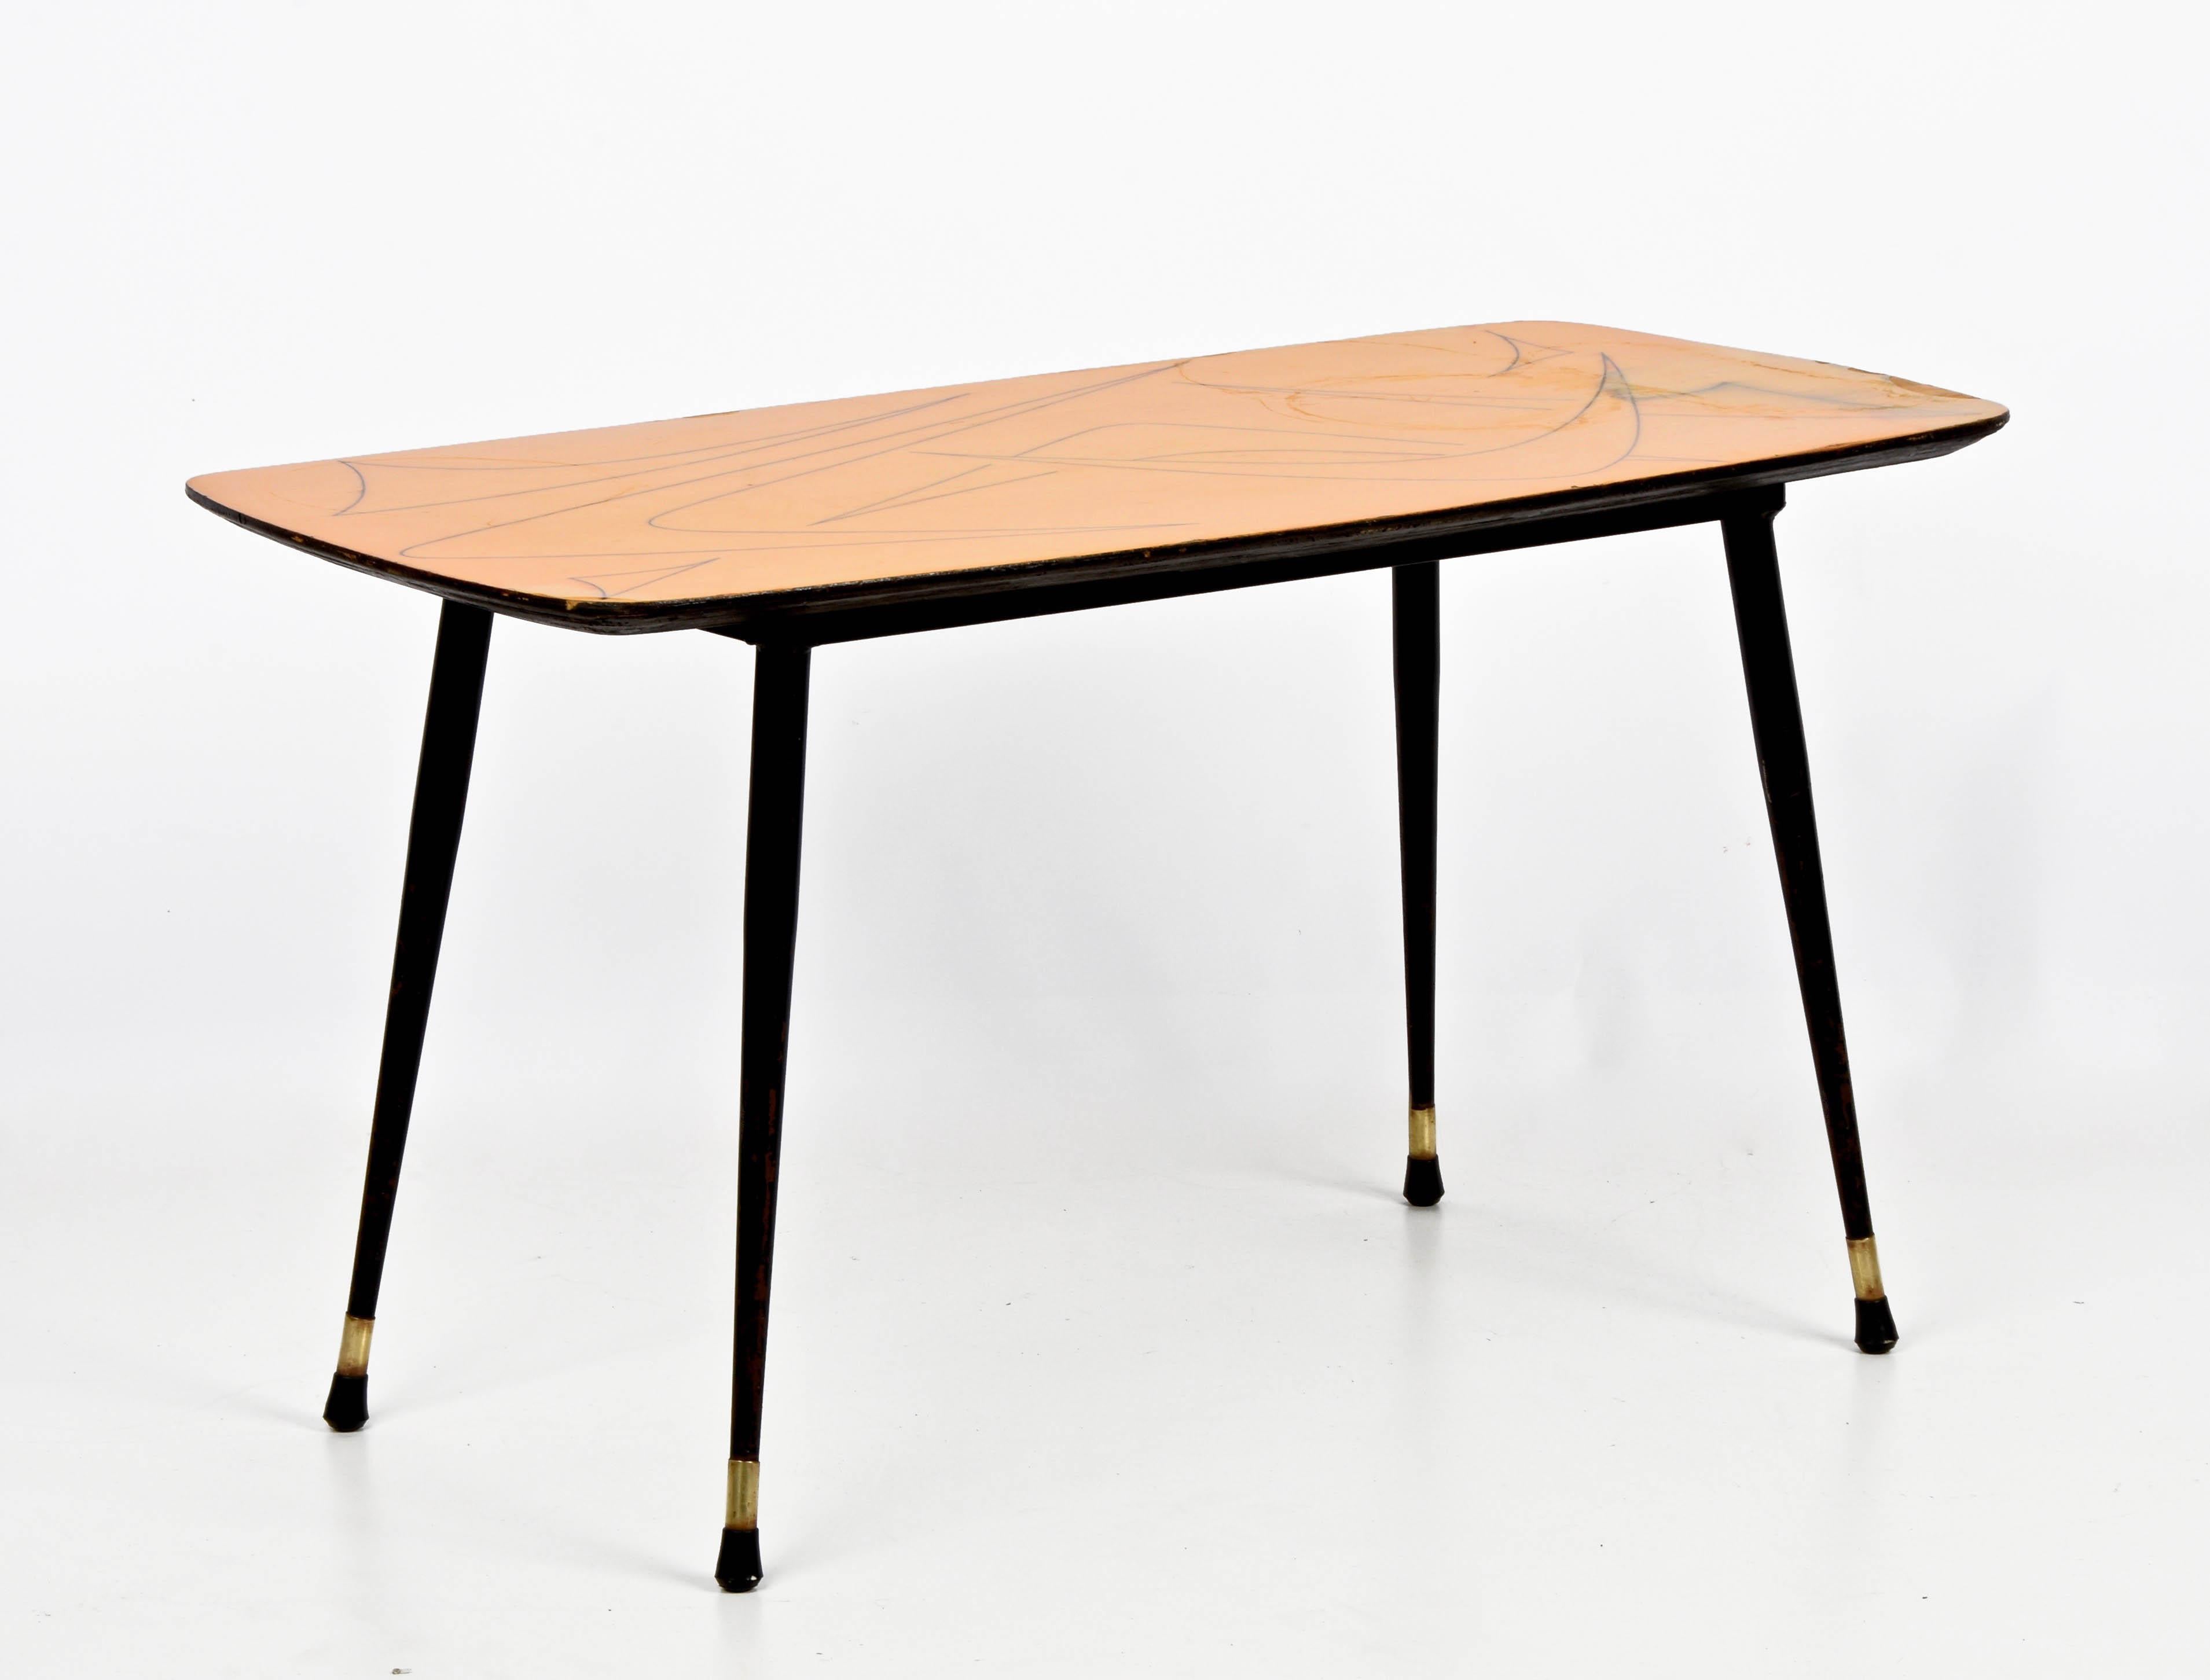 Midcentury Italian Painted Wood, Brass and Black Metal Coffee Table, 1950s For Sale 6